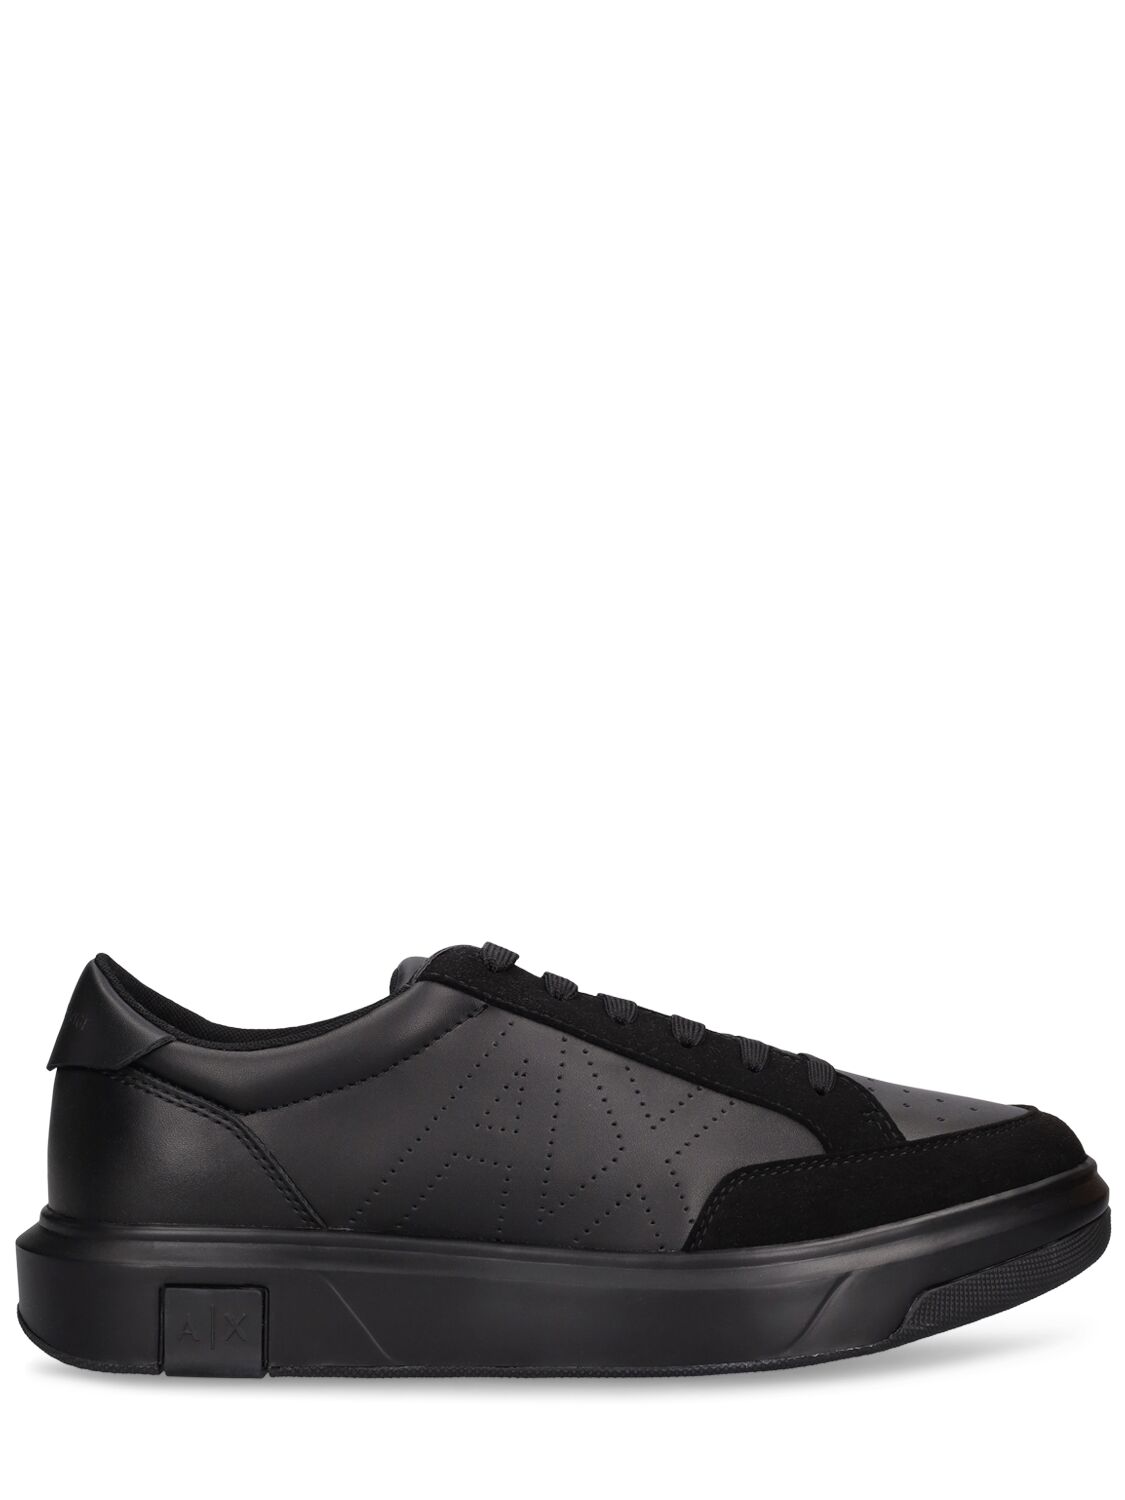 Armani Exchange Leather Low Top Trainers In Black